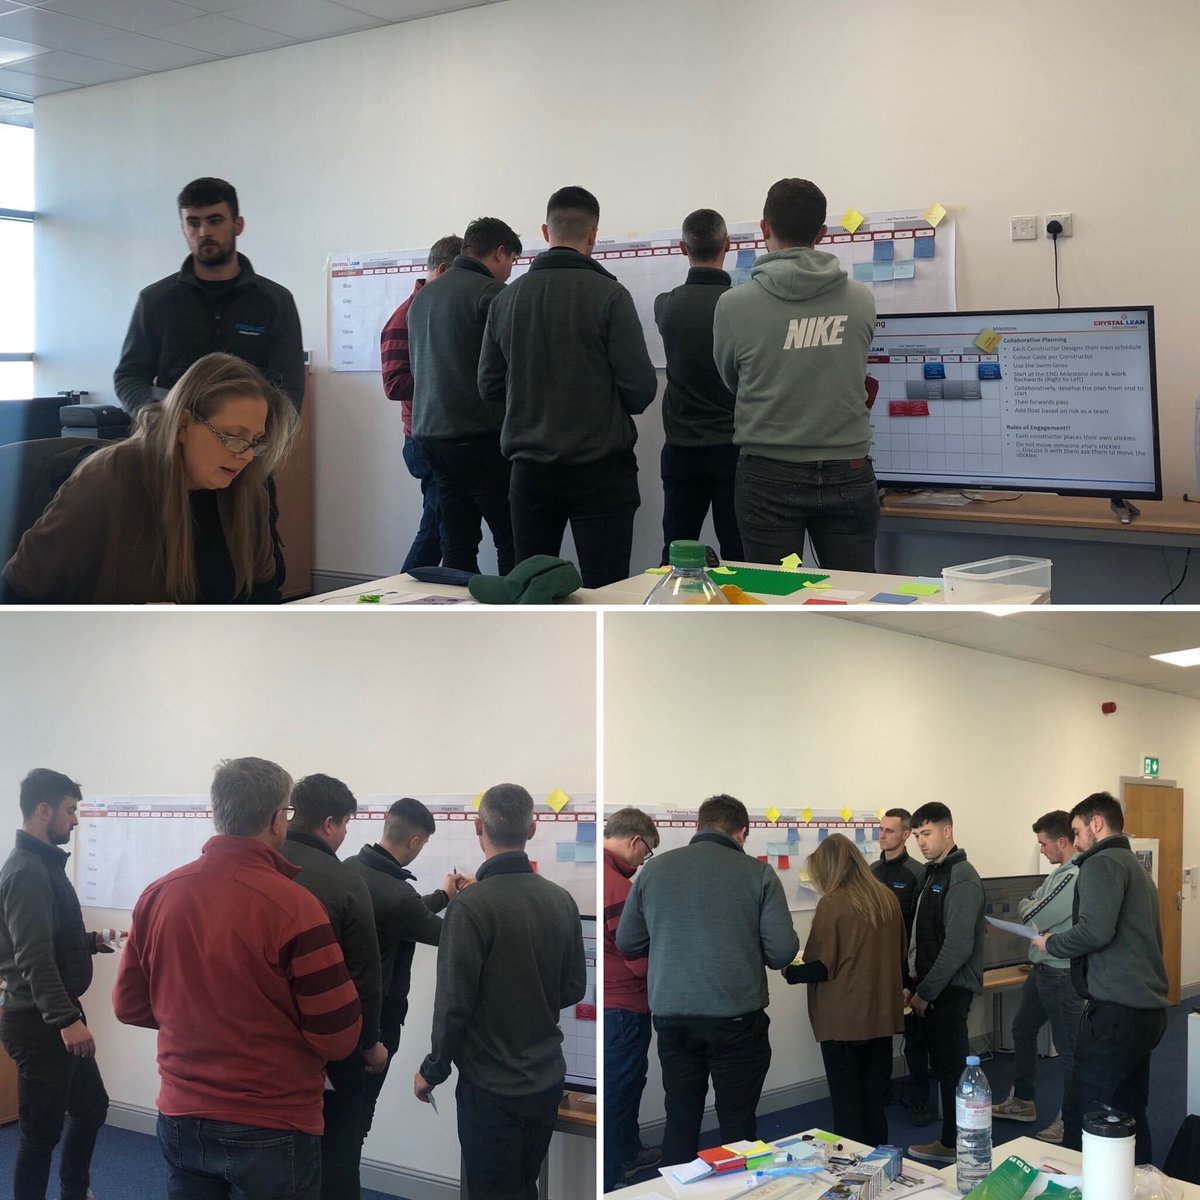 We recently completed Last Planner training for some of the @ArdmacLtd team in Cork.

Congratulations to Seamus and all the team on their hard work and dedication. We wish them the best of luck on their continuous improvement journey.🎉 

#LastPlanner #FridayFeeling #Training